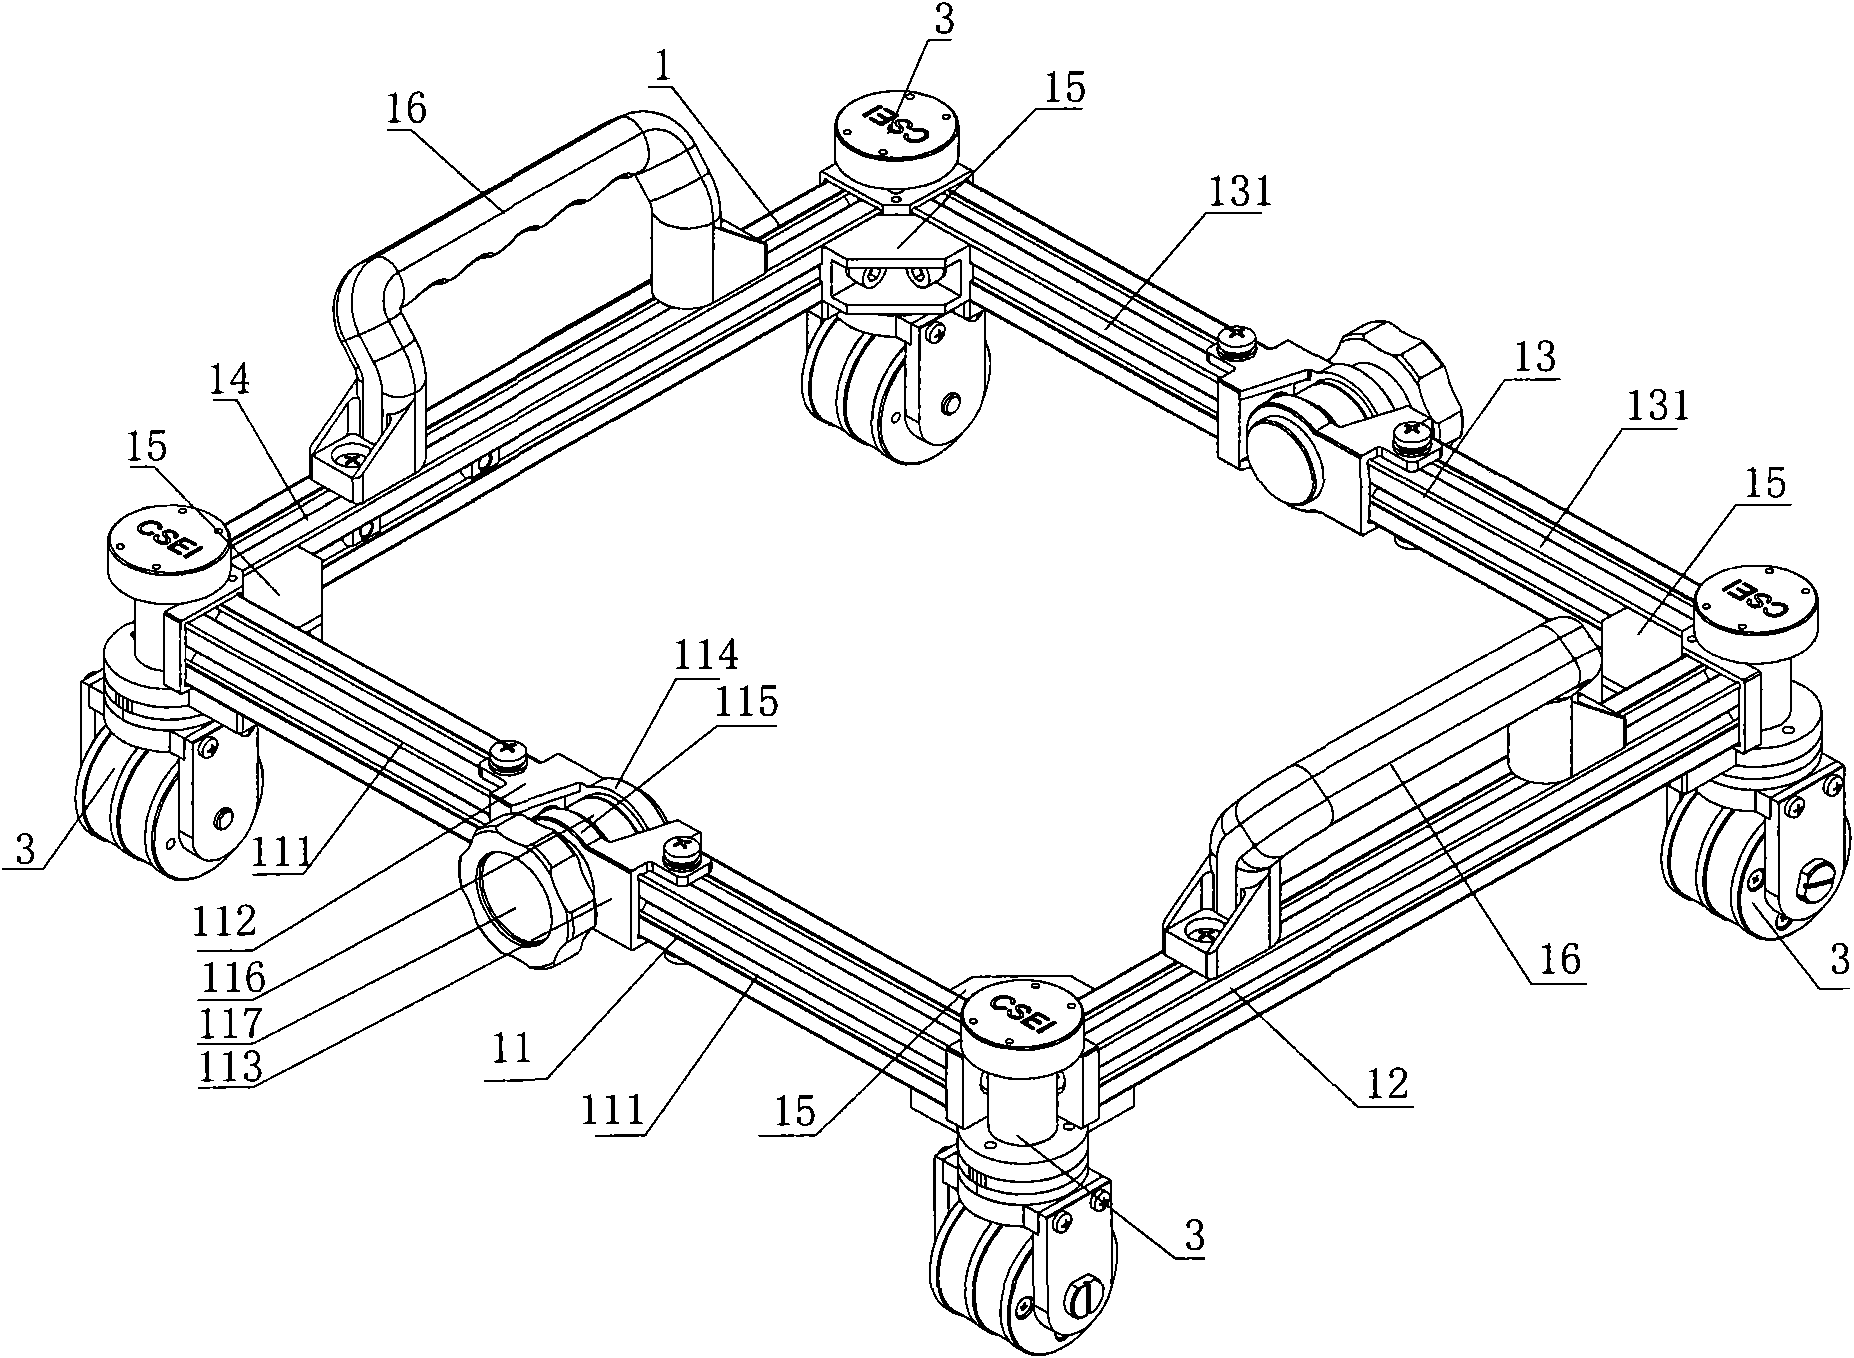 Ultrasonic inspecting and scanning device of welding line